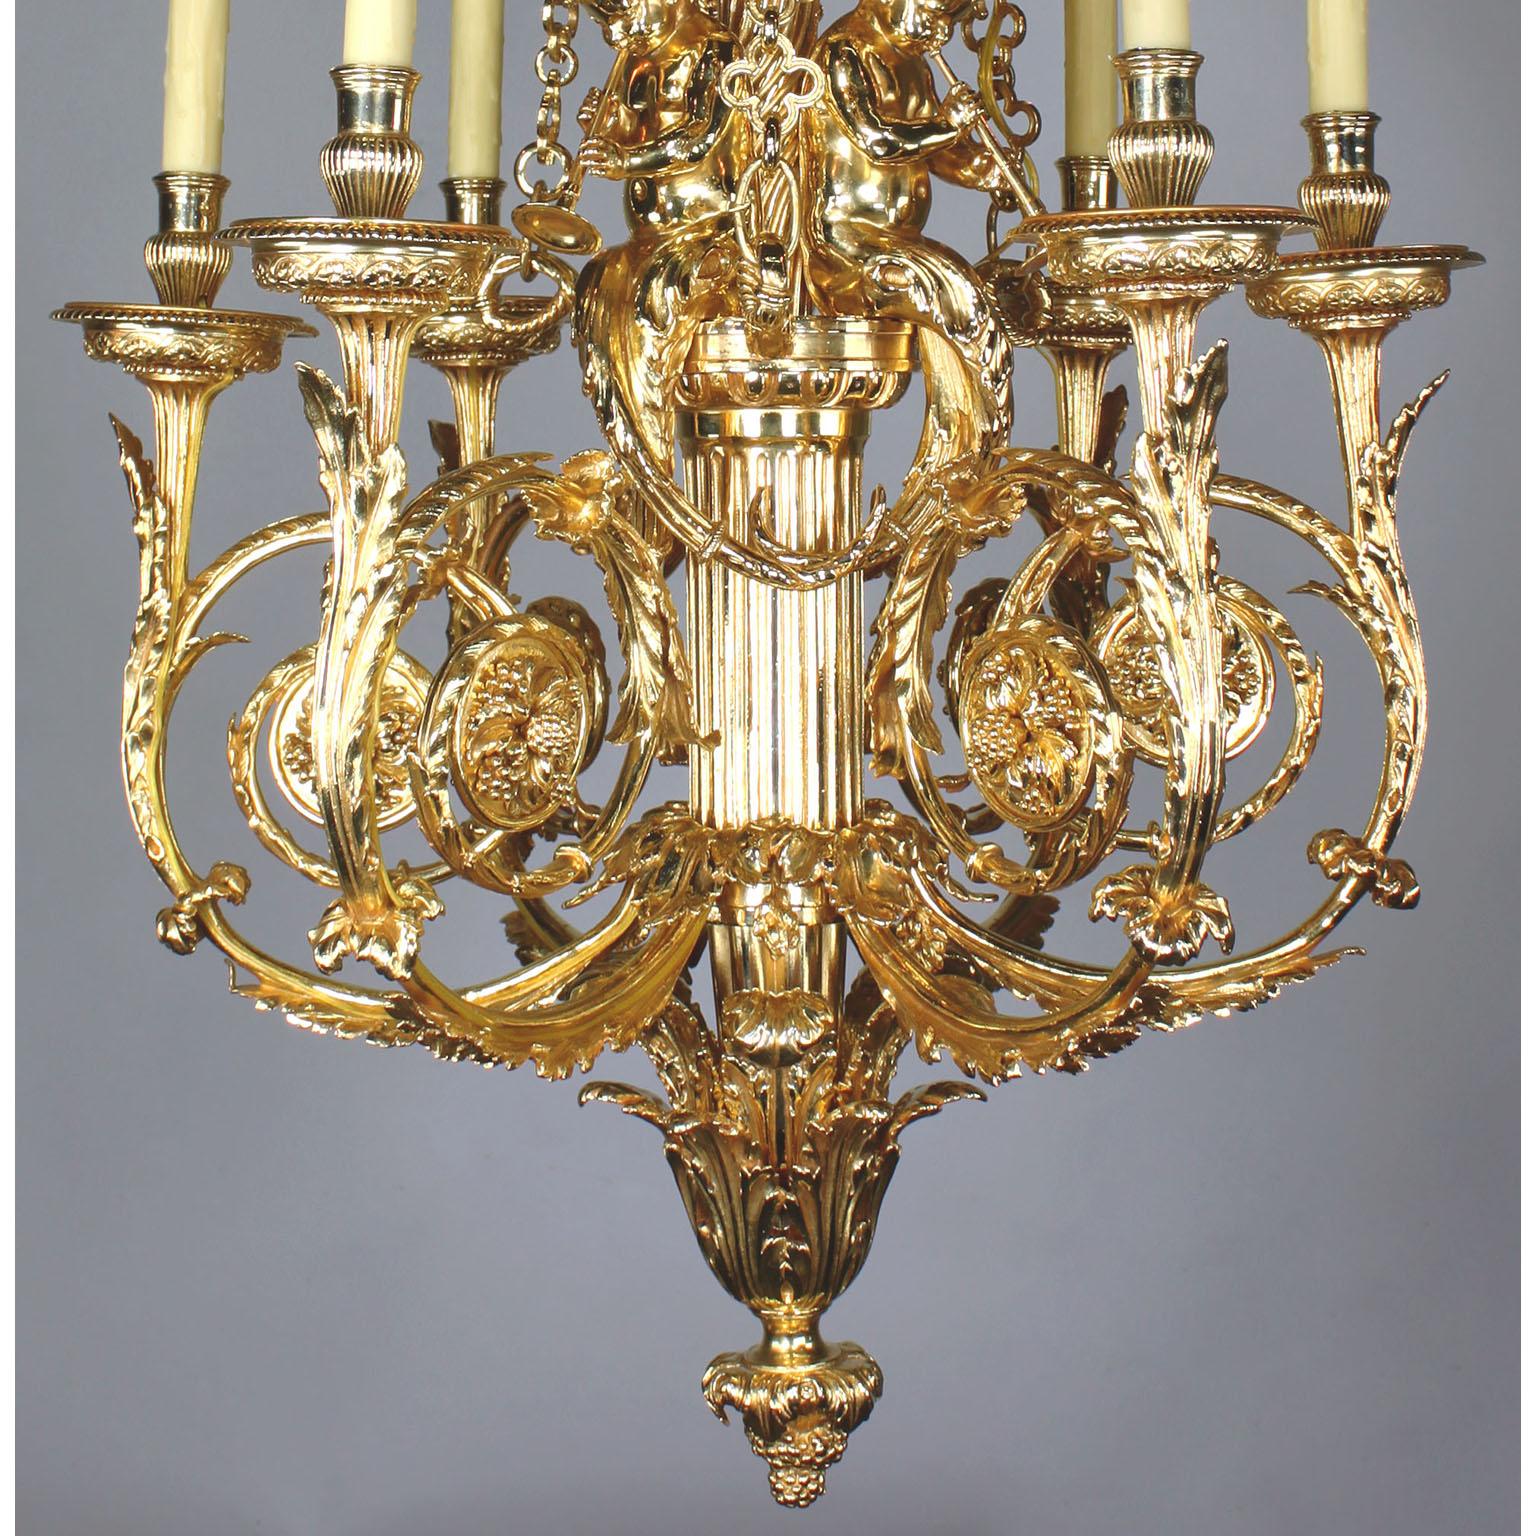 A French Louis XVI style gilt-bronze figural seven-light chandelier with Figures of Putti (Children), after the model by Pierre Gouthière in the Cabinet doré for Marie-Antoinette at the Royal Palace of Versailles. The nicely cast bright gilt-bronze